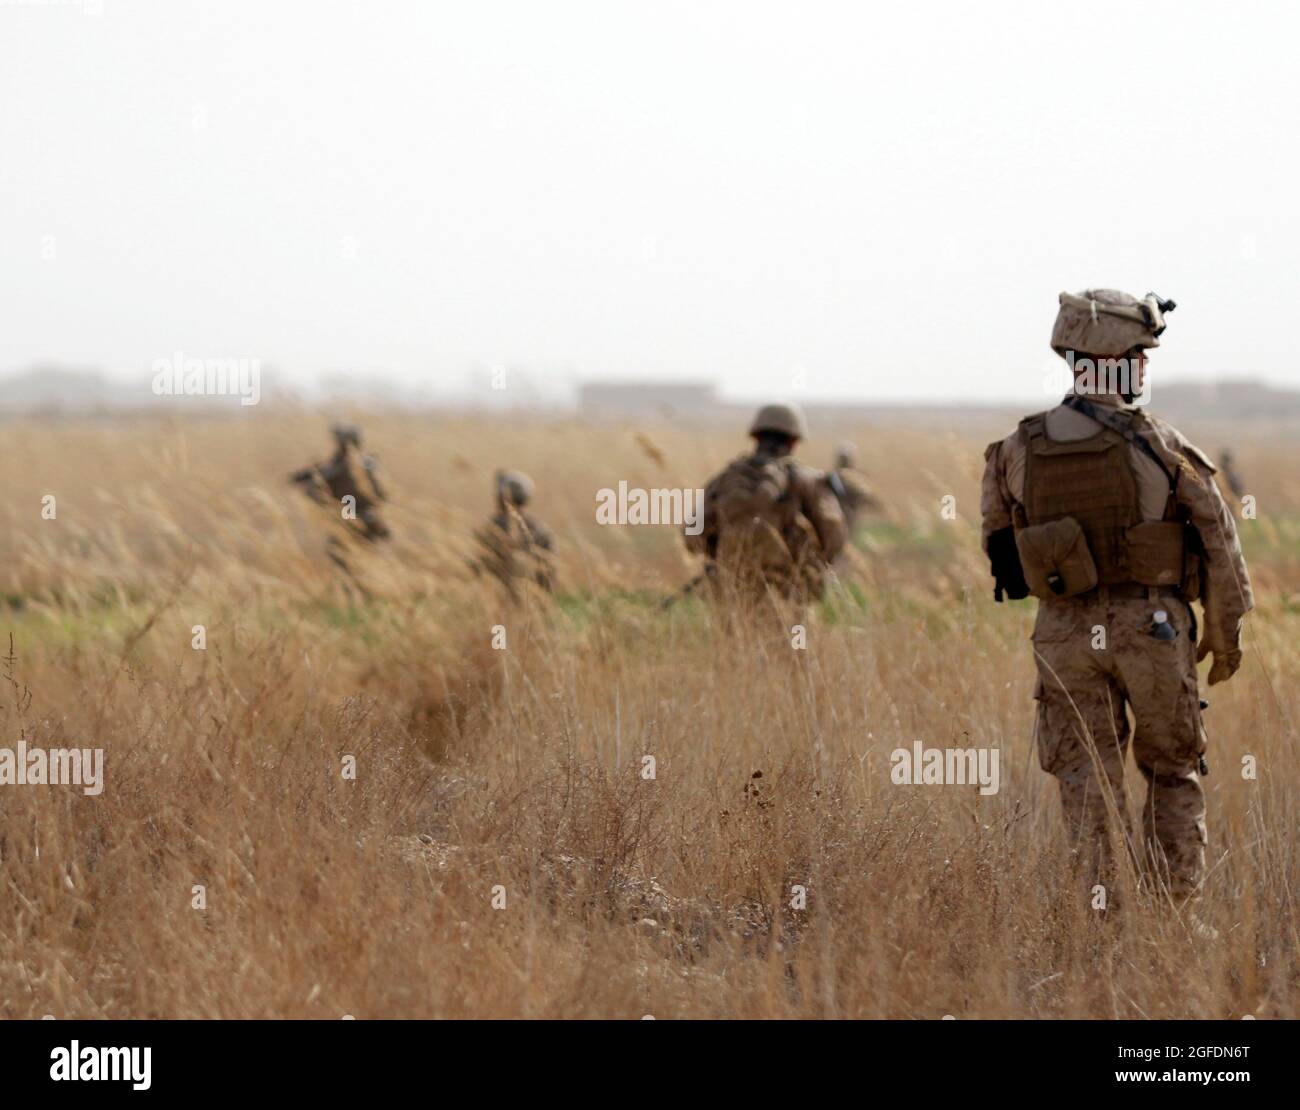 Marines of Combined Anti-Armor Team 1, Weapons Company, 1st Battalion, 3rd Marine Regiment, patrol with Marines of Charlie Co., 1/3, through a grassy field in the Five Points area Feb. 14.  During the patrol, Marines held their first meeting with village elders in the area before engaging with Taliban fighters. Stock Photo